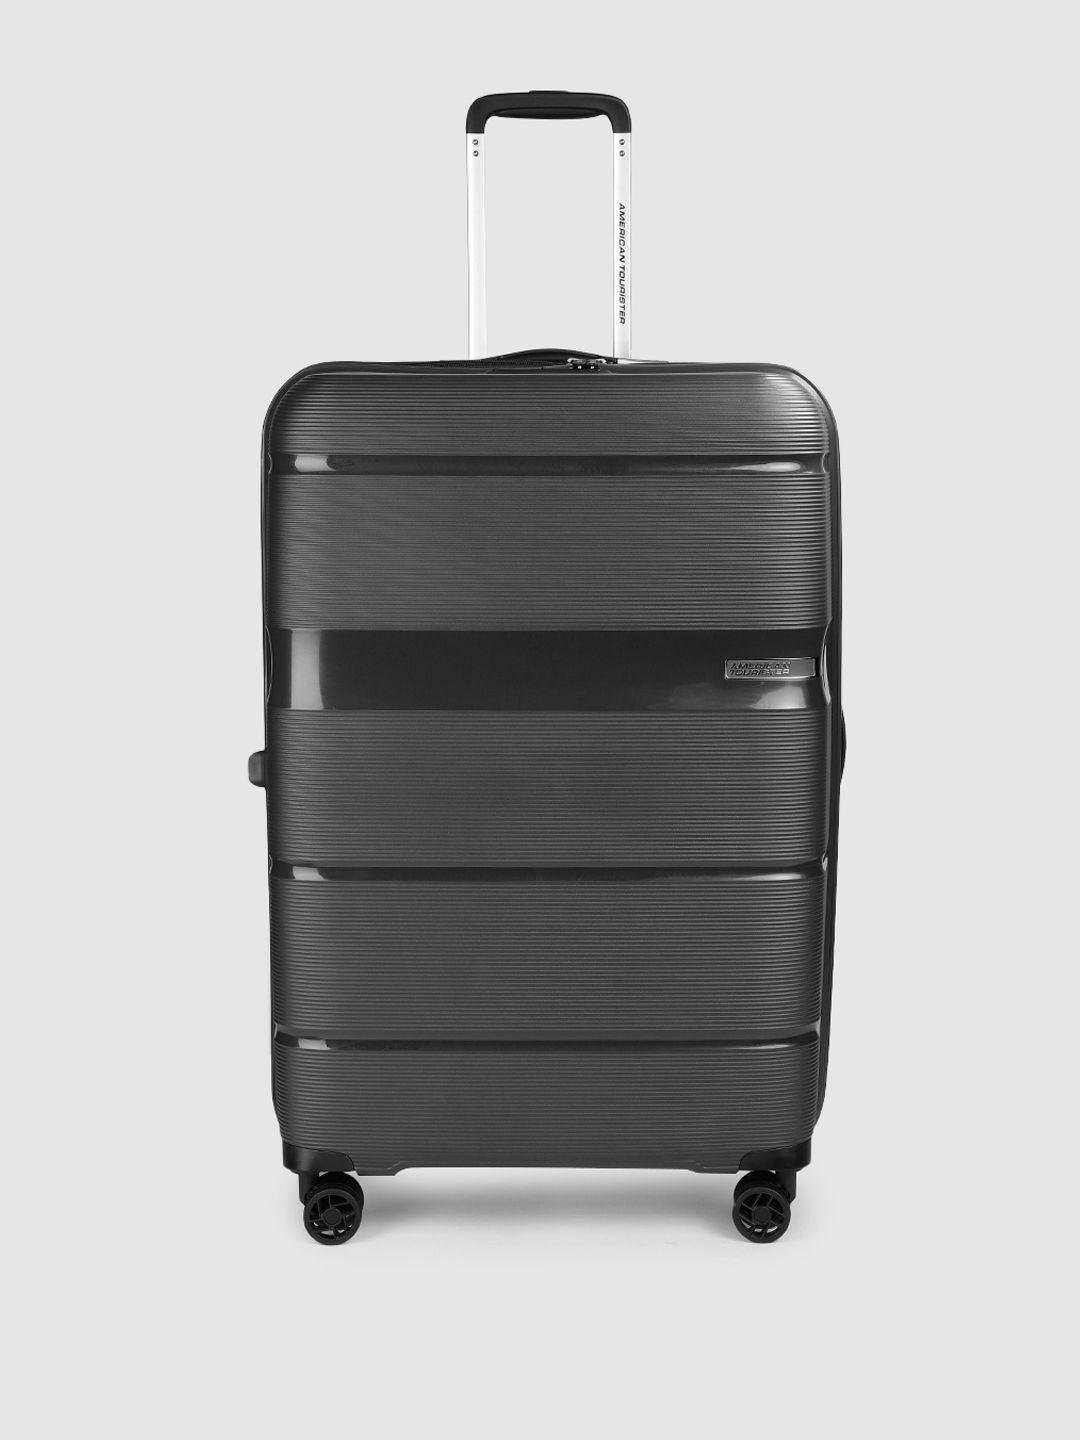 american-tourister-textured-linex-spinner-large-trolley-suitcase